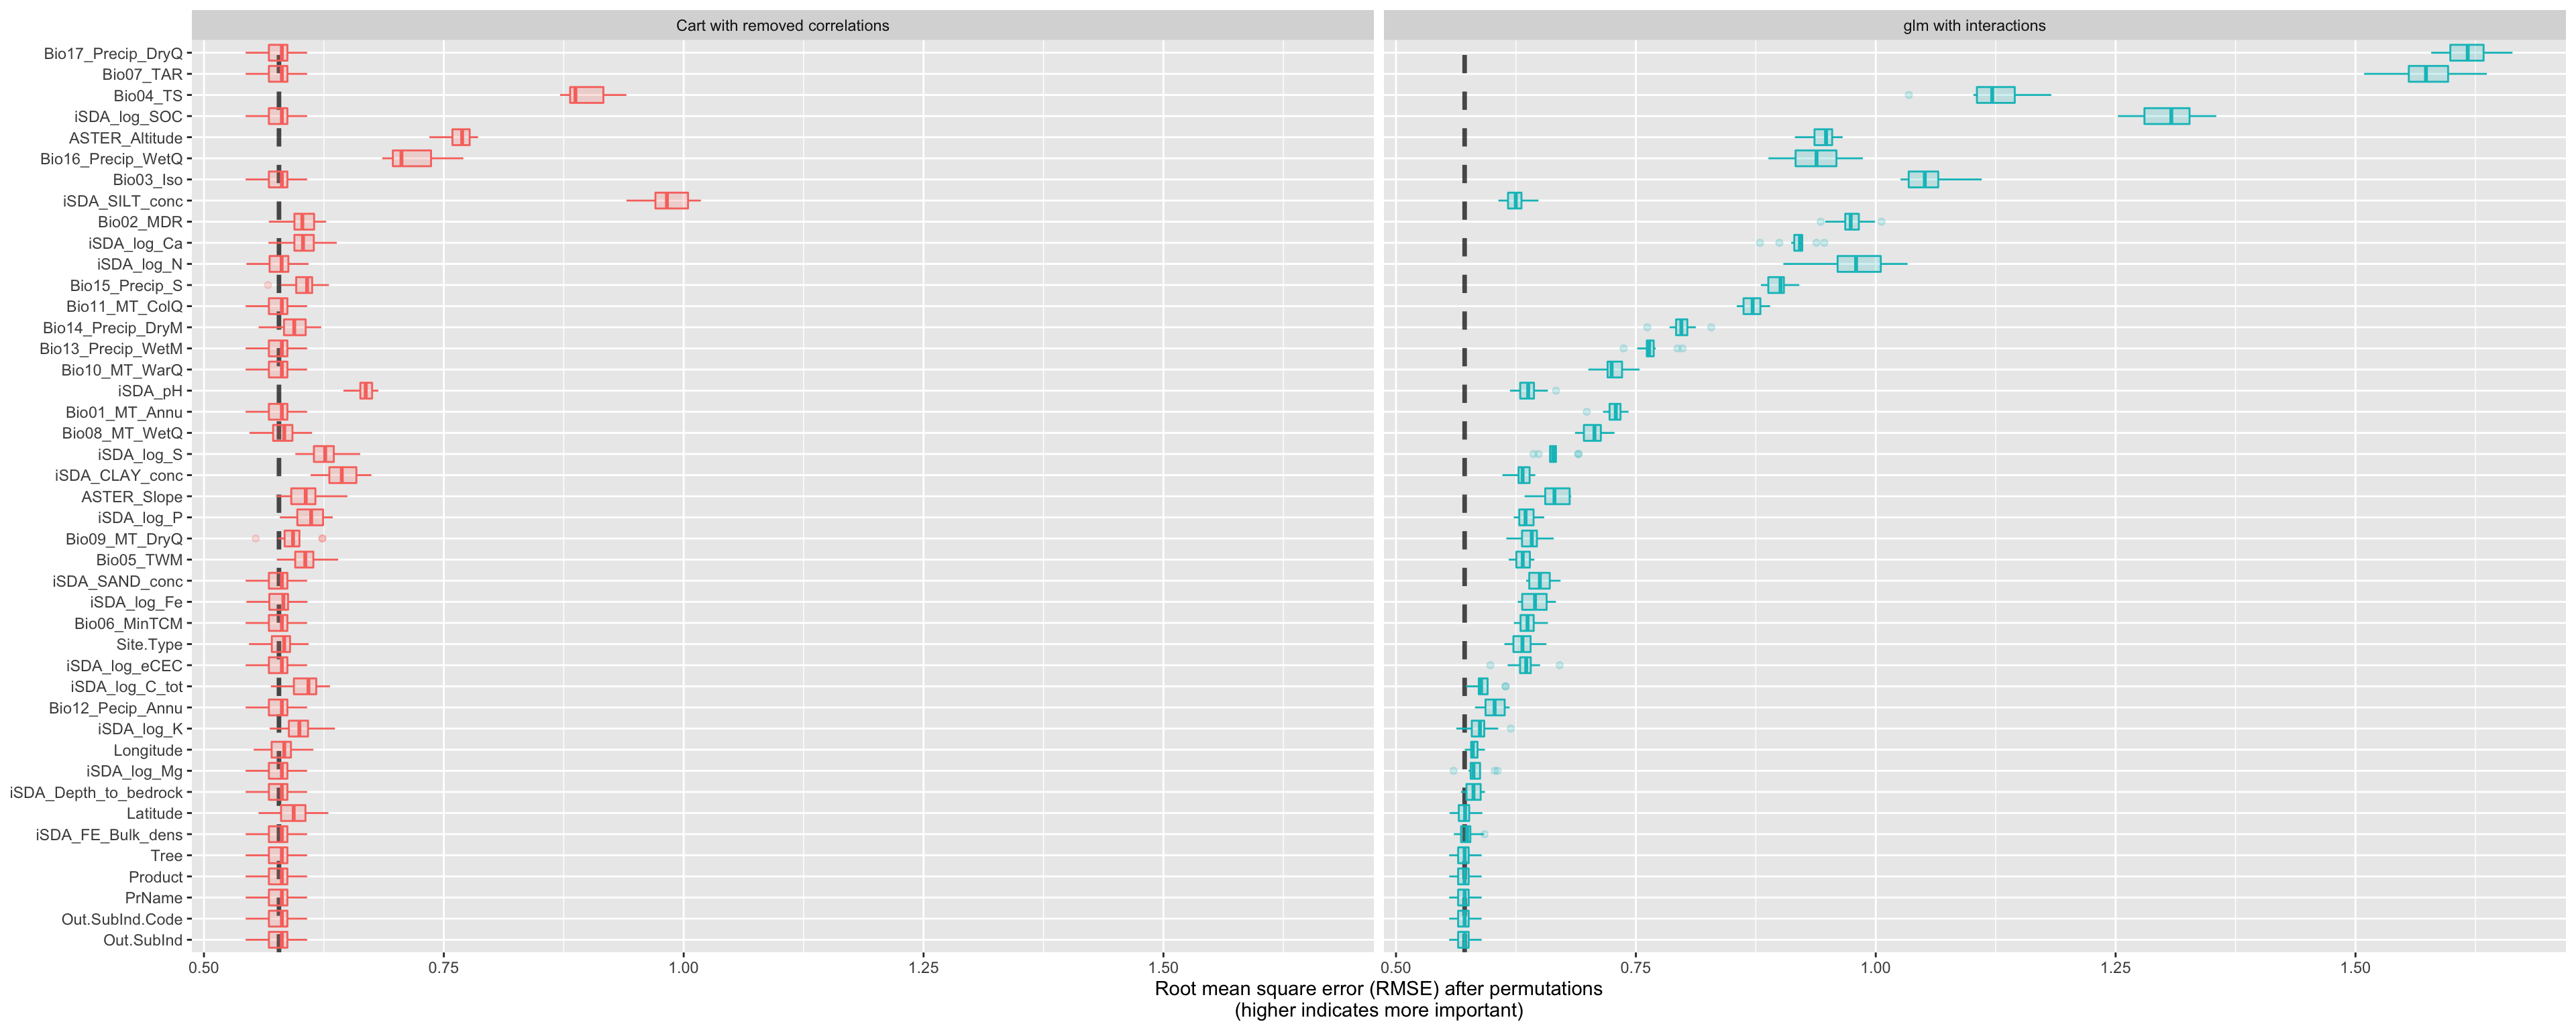 Costumn plot of the vip using the special ggplot function for the cart and glm models